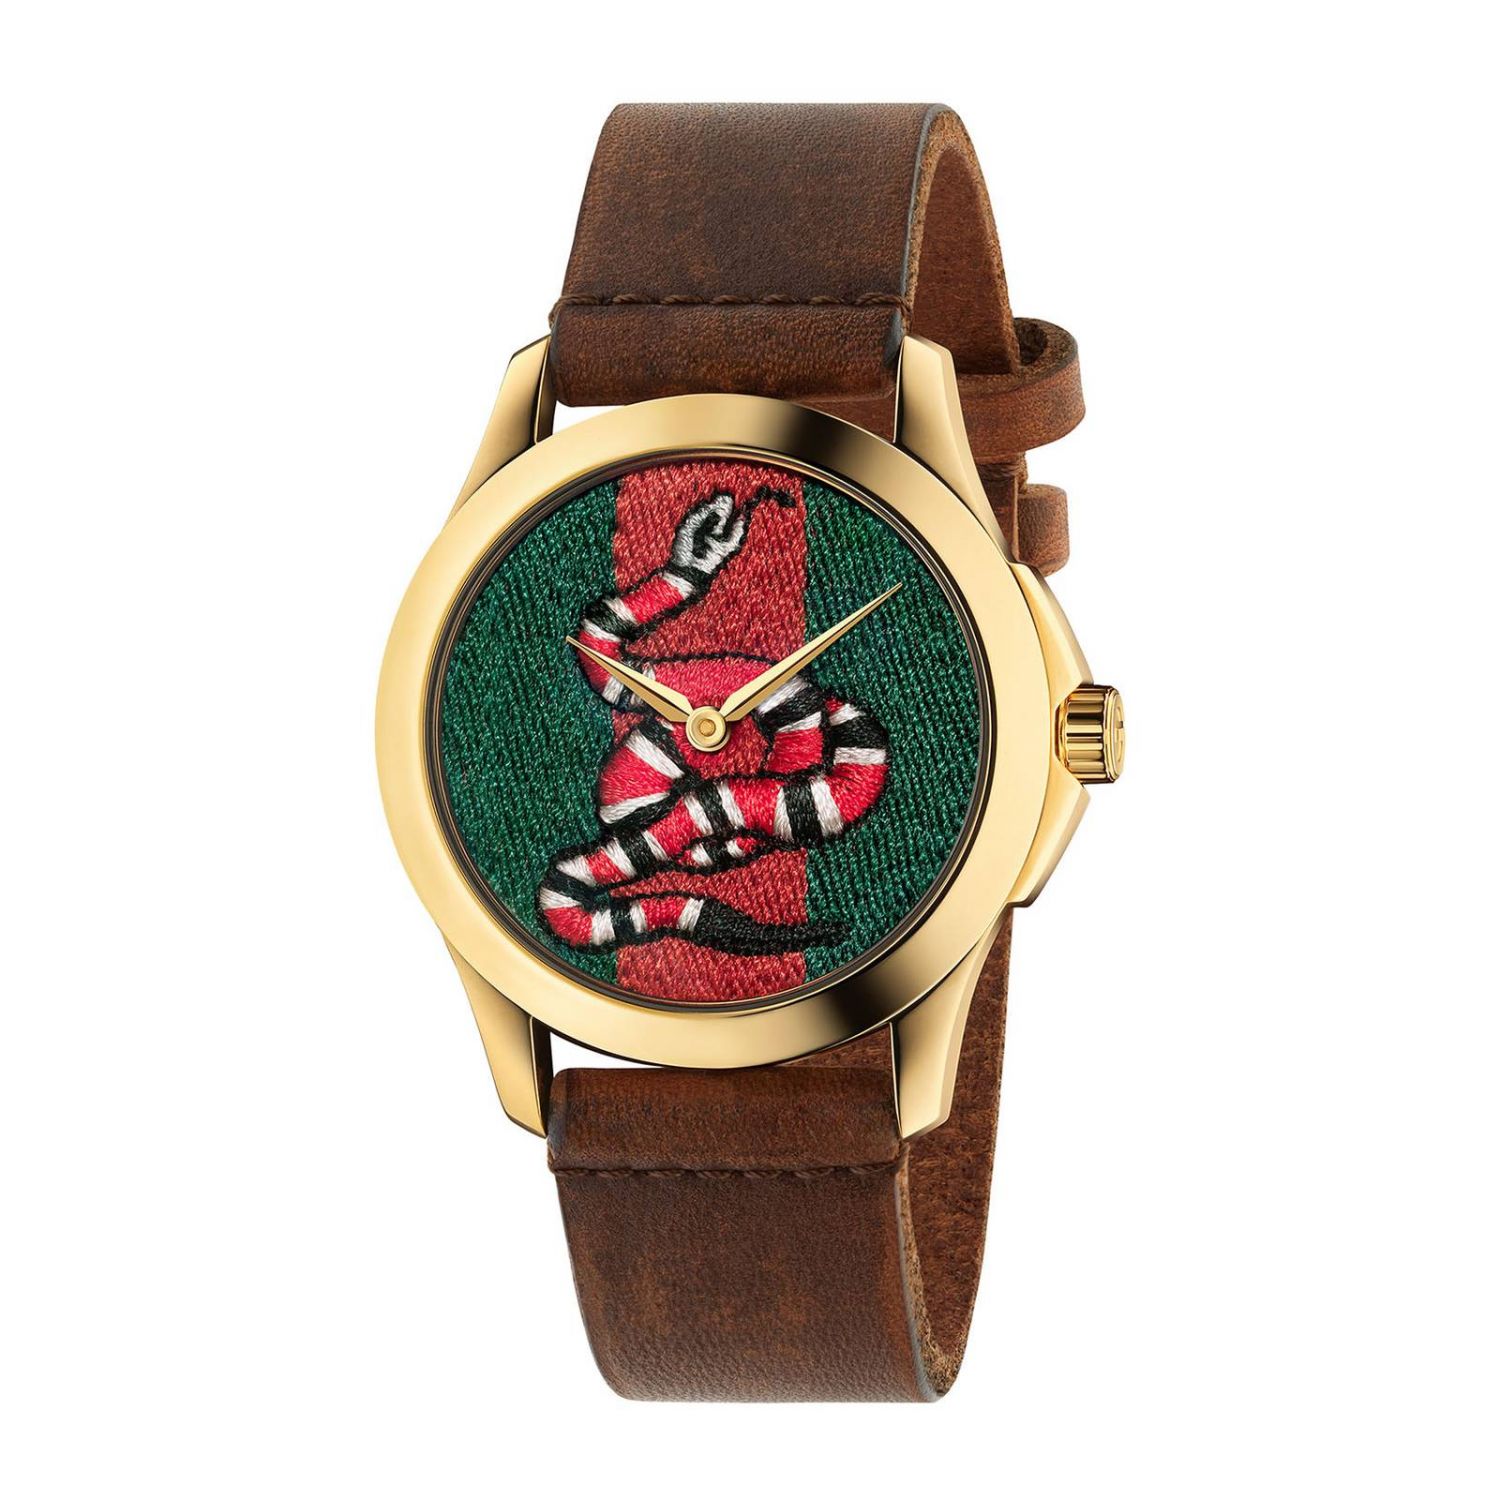 Watch Gucci: Le Marché des Merveilles watch case 38mm with Snake pattern brown 1